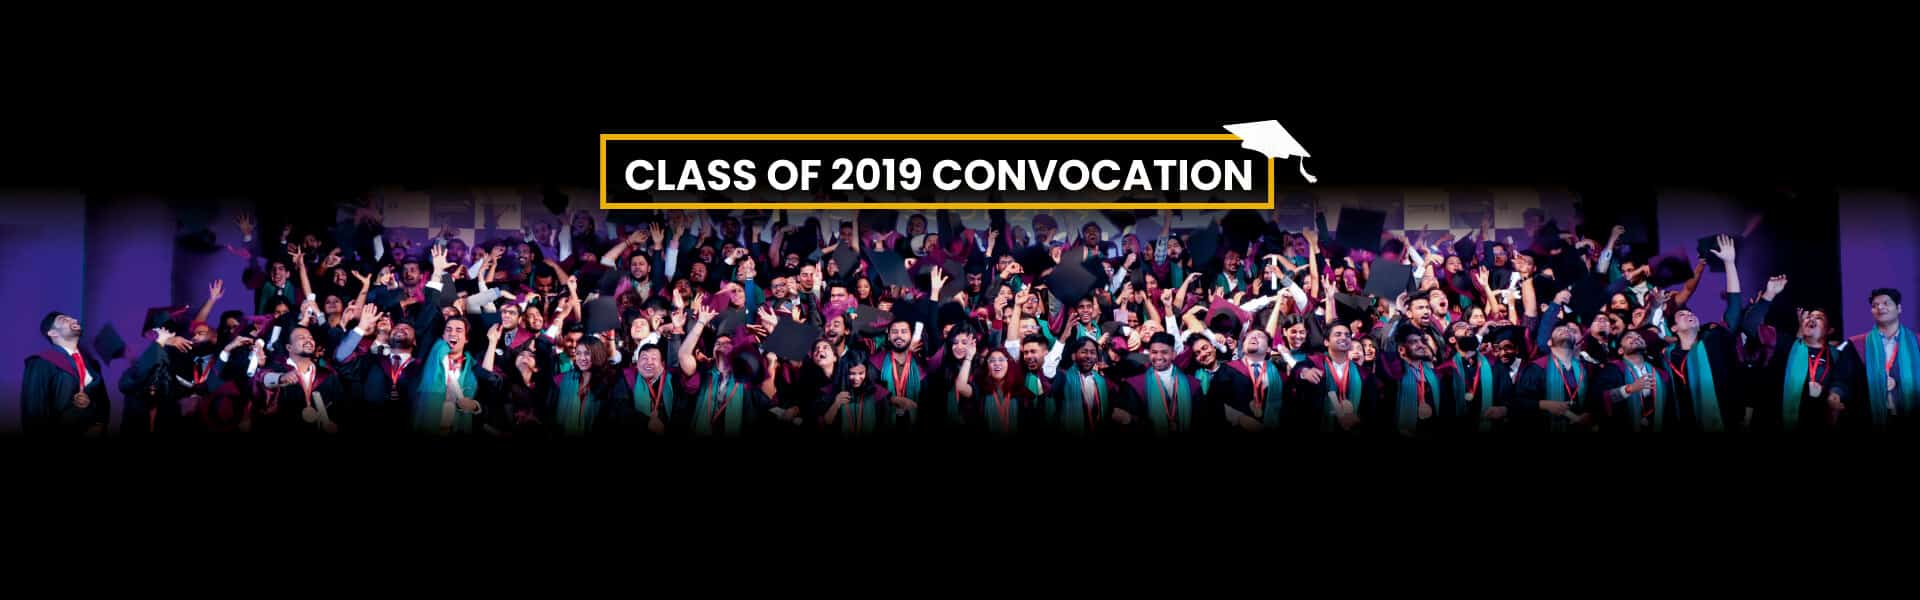 Convocation of Class 2019